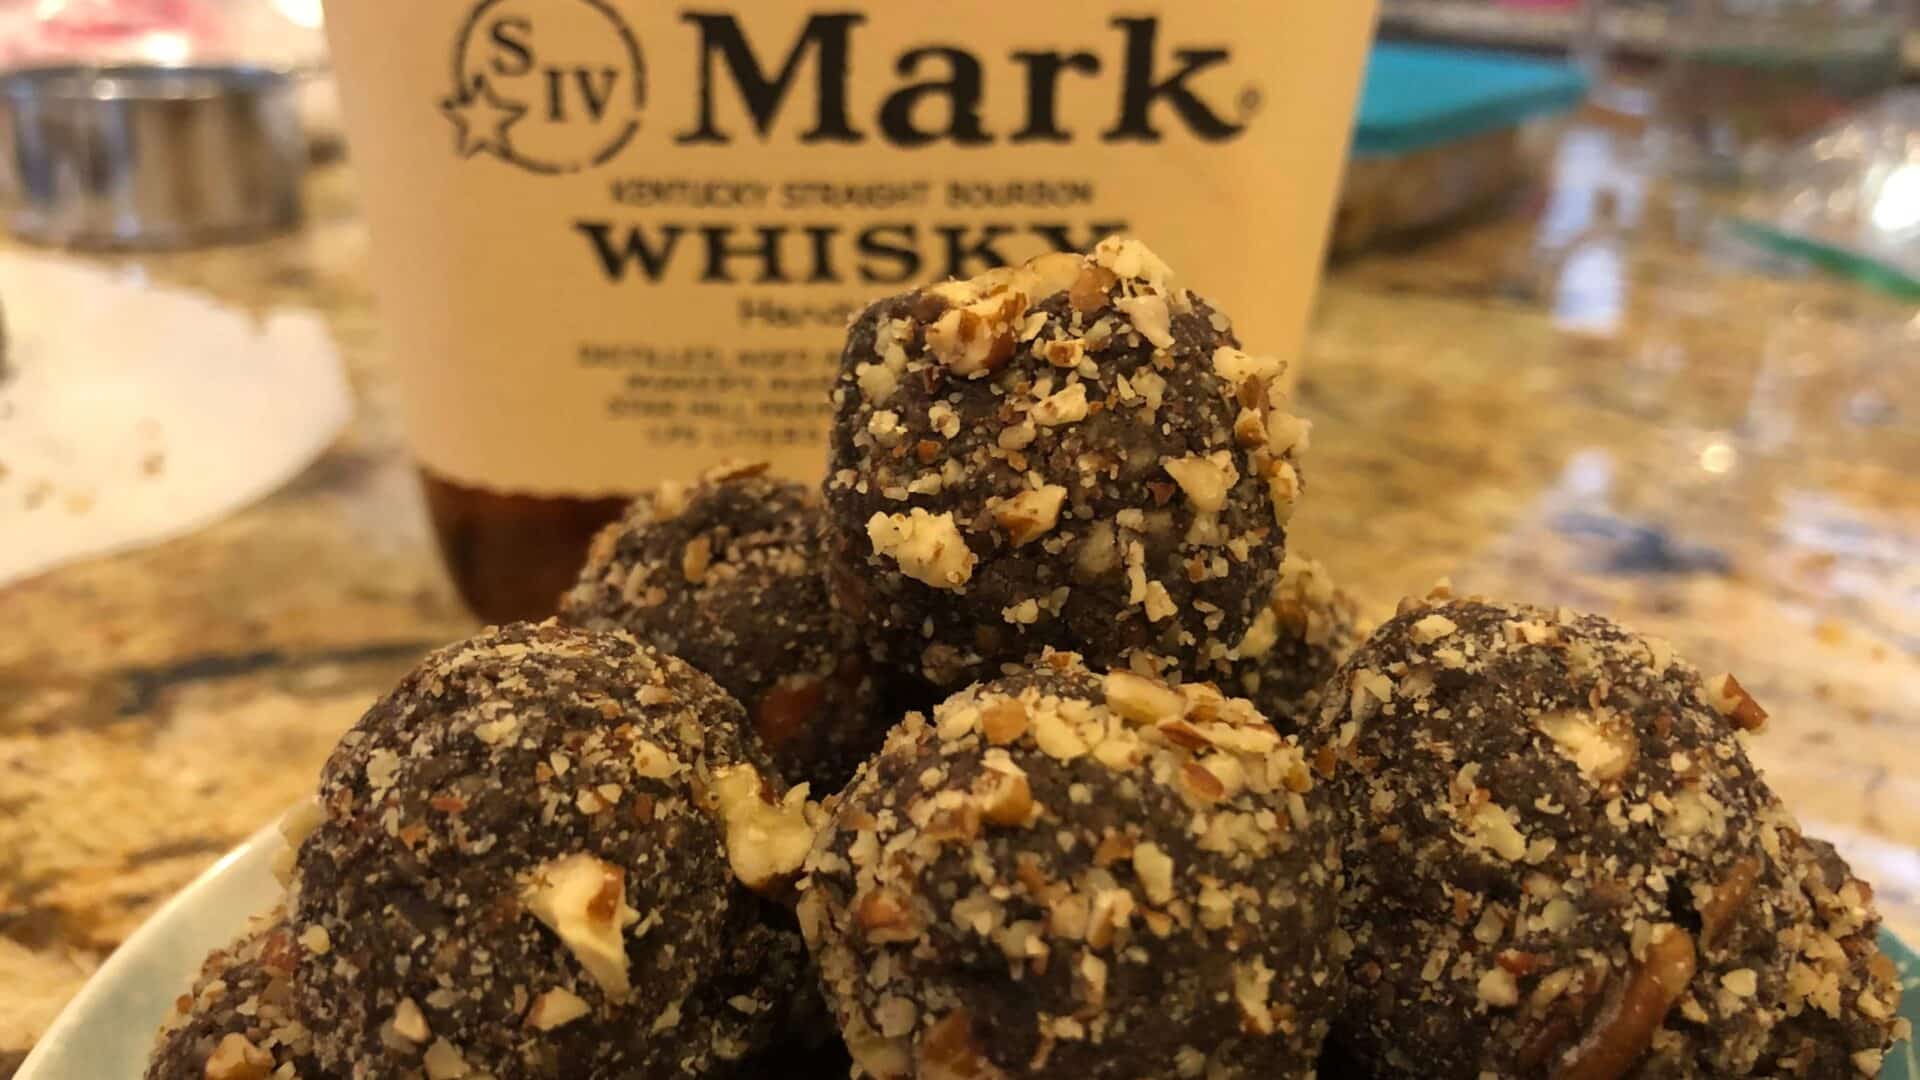 Round dark brown dough balls coated with chopped pecans and a bottle of bourbon whiskey in the background